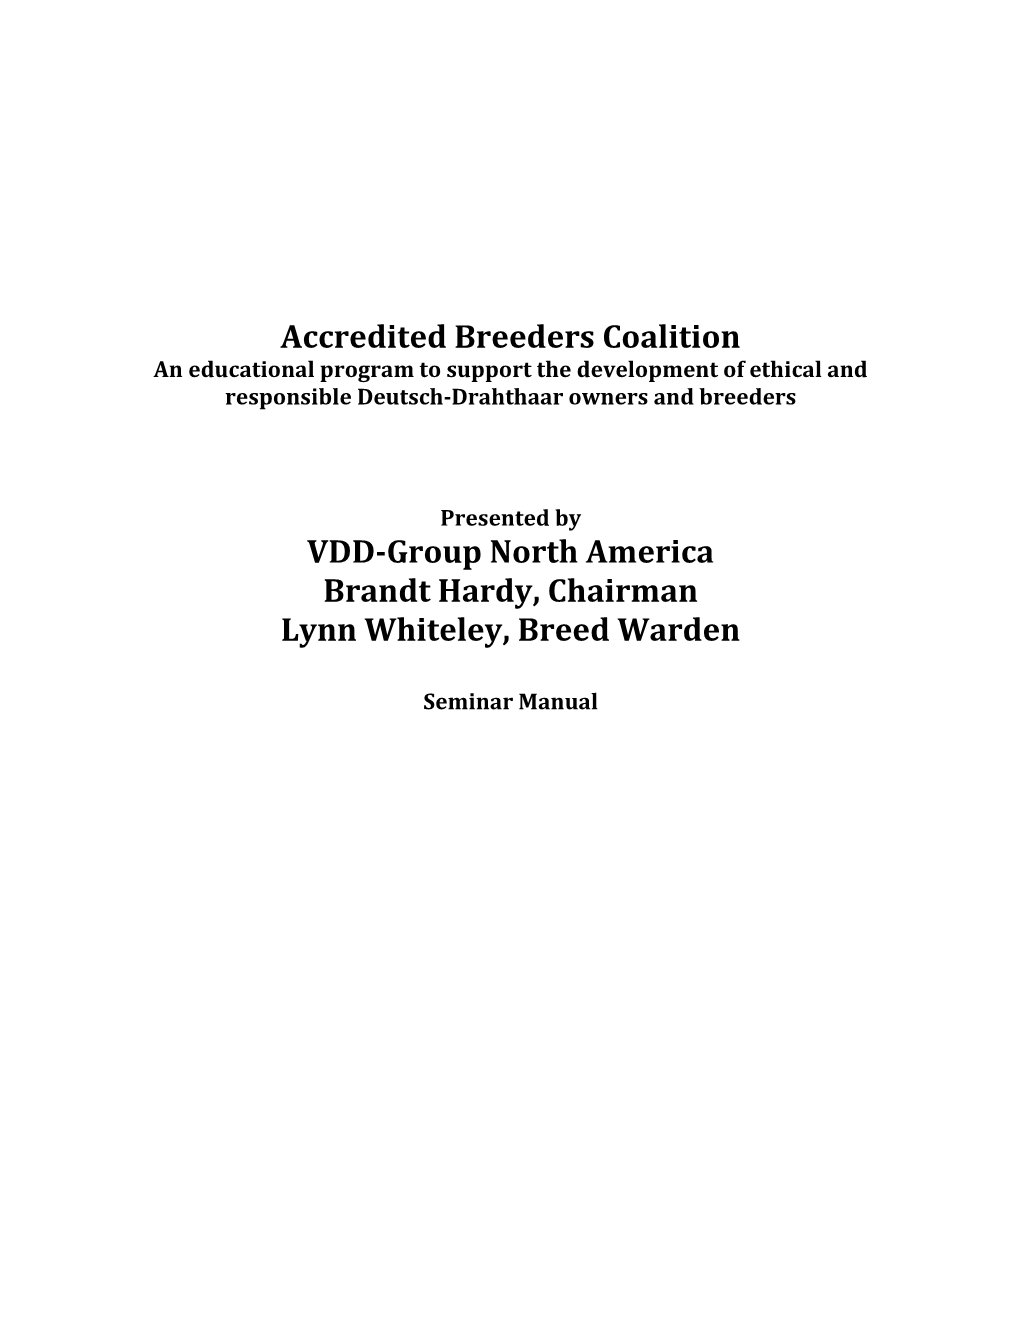 Accredited Breeders Coalition VDD-Group North America Brandt